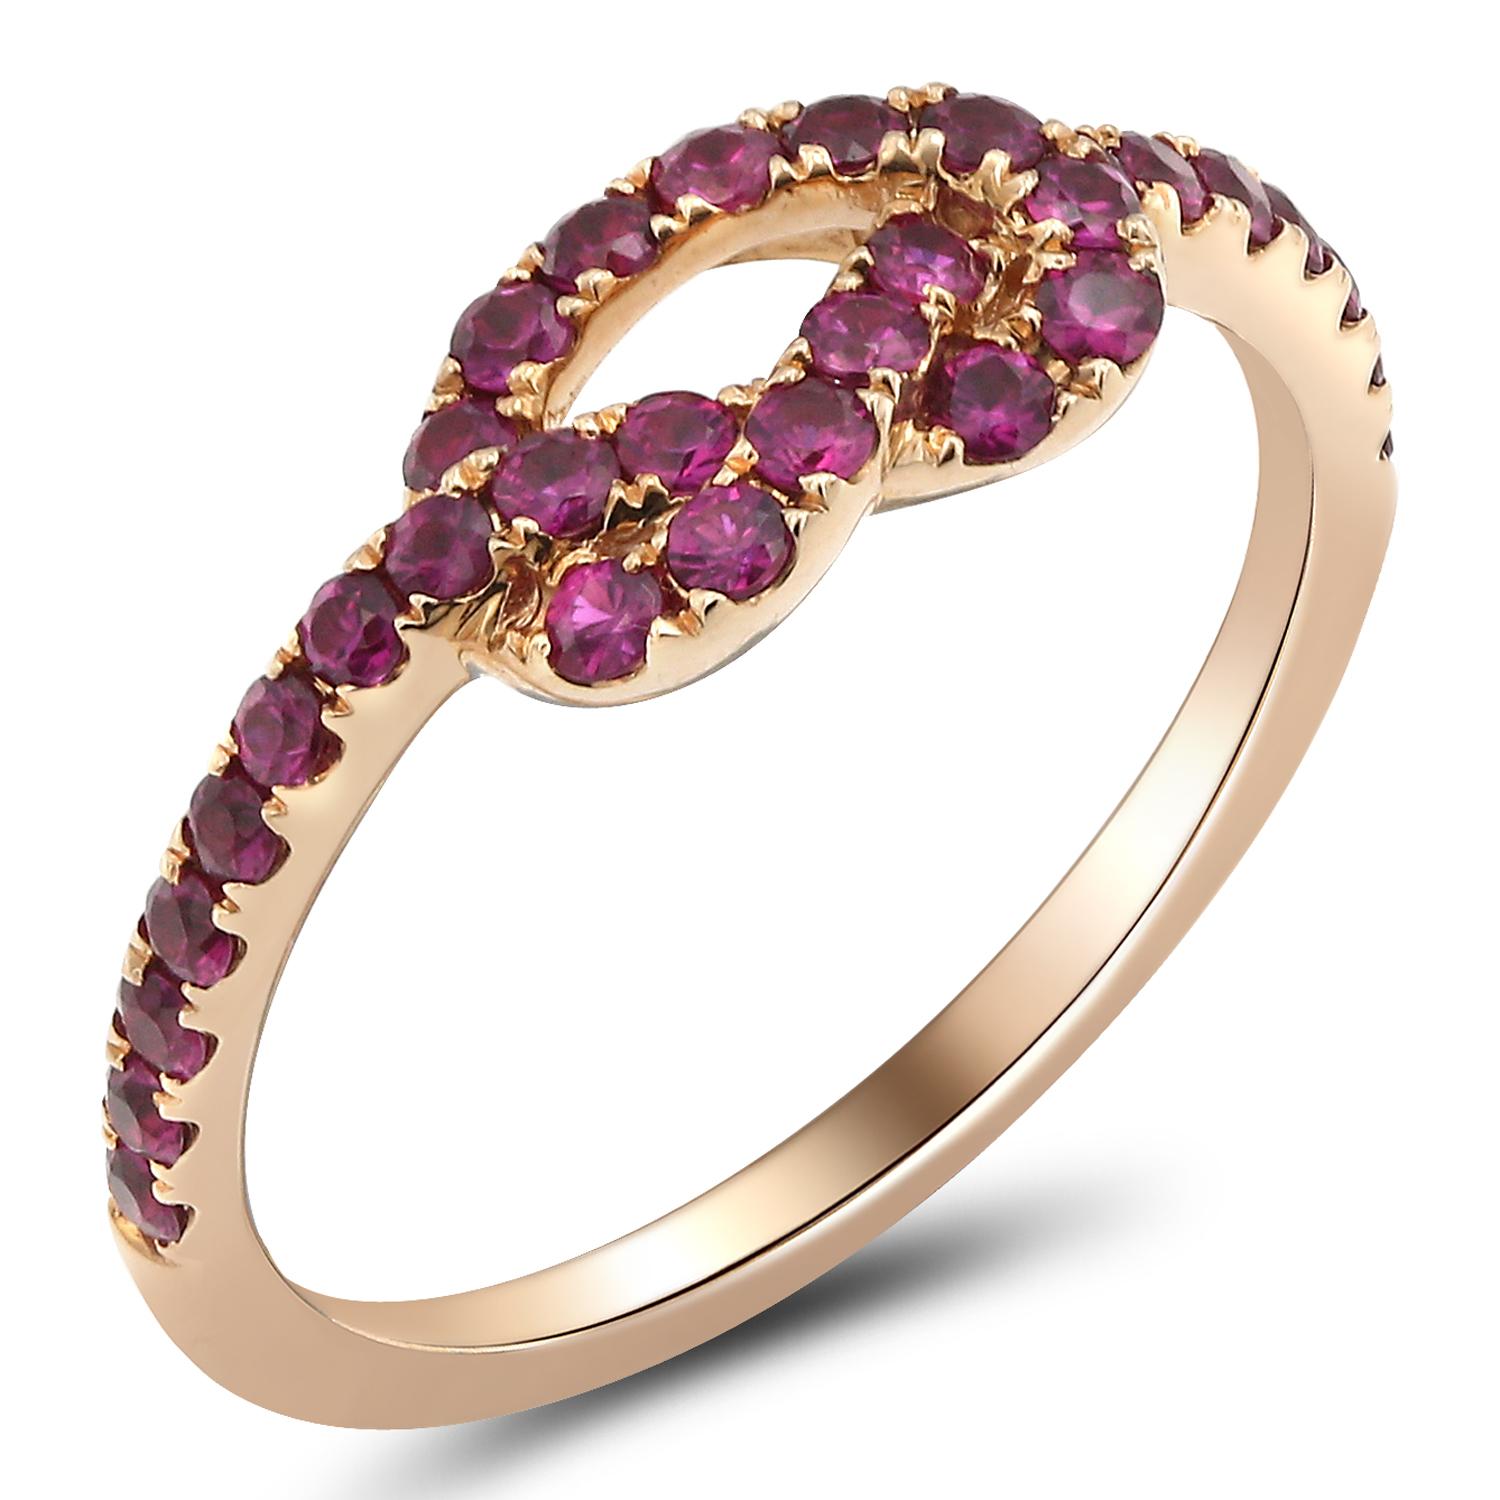 Infinity 18 Karat Pink Gold and Ruby Cocktail Ring.

Rubies approximately of 0.60 karats, mounted on 18 karat pink gold ring. The ring weighs approximately 2.04 grams.

Please note: The charges specified do not include any shipment, VAT, DUTY, TAX,